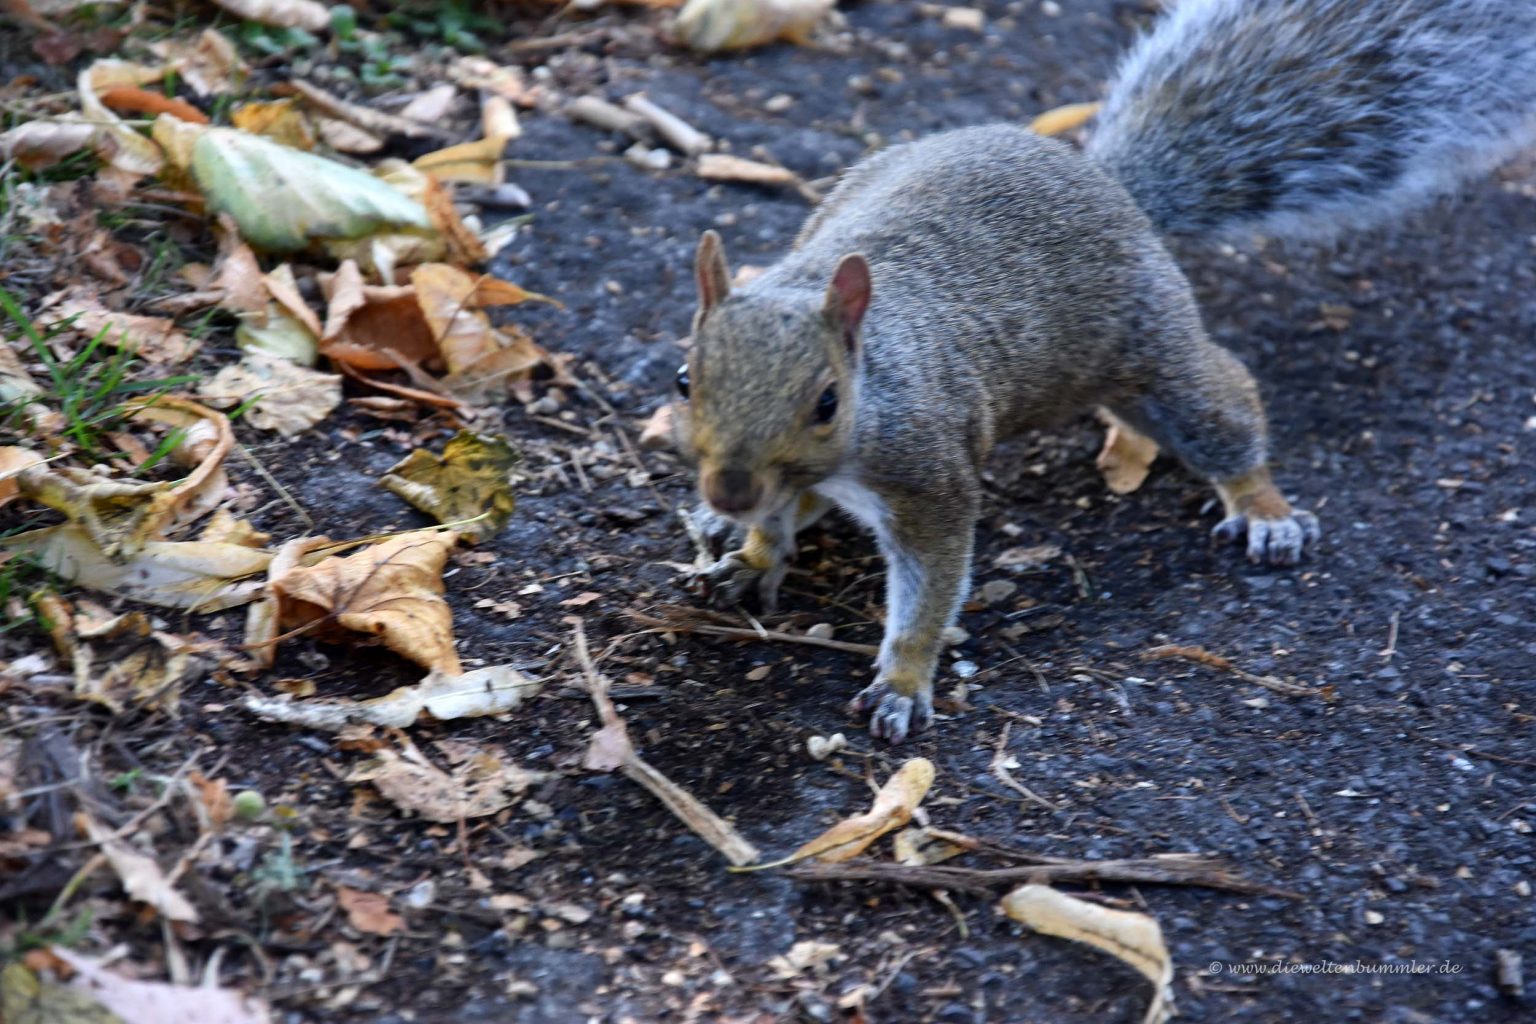 Squirrel in Southampton